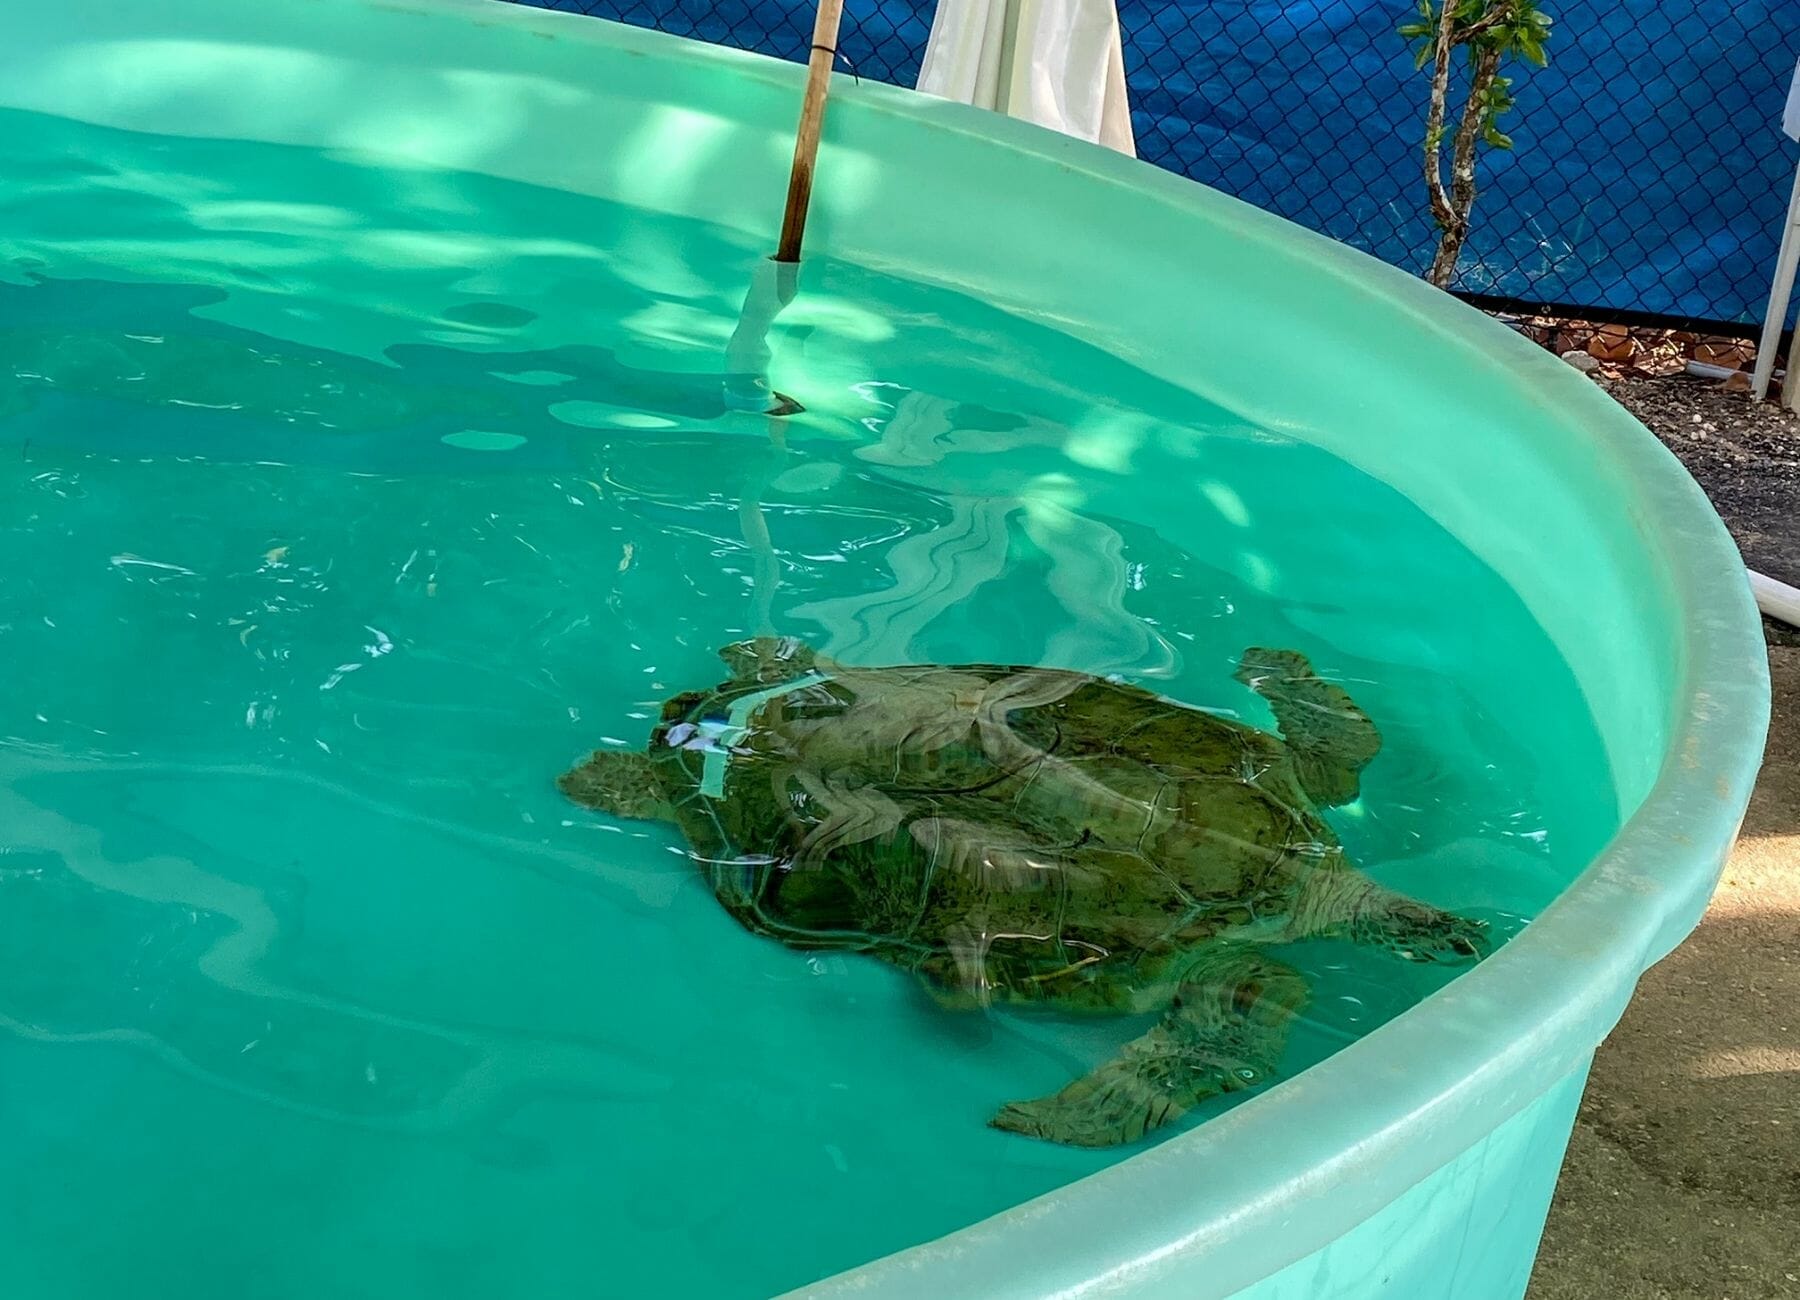 Shows a turtle swimming in a pool. Things to do in Jupiter, Florida